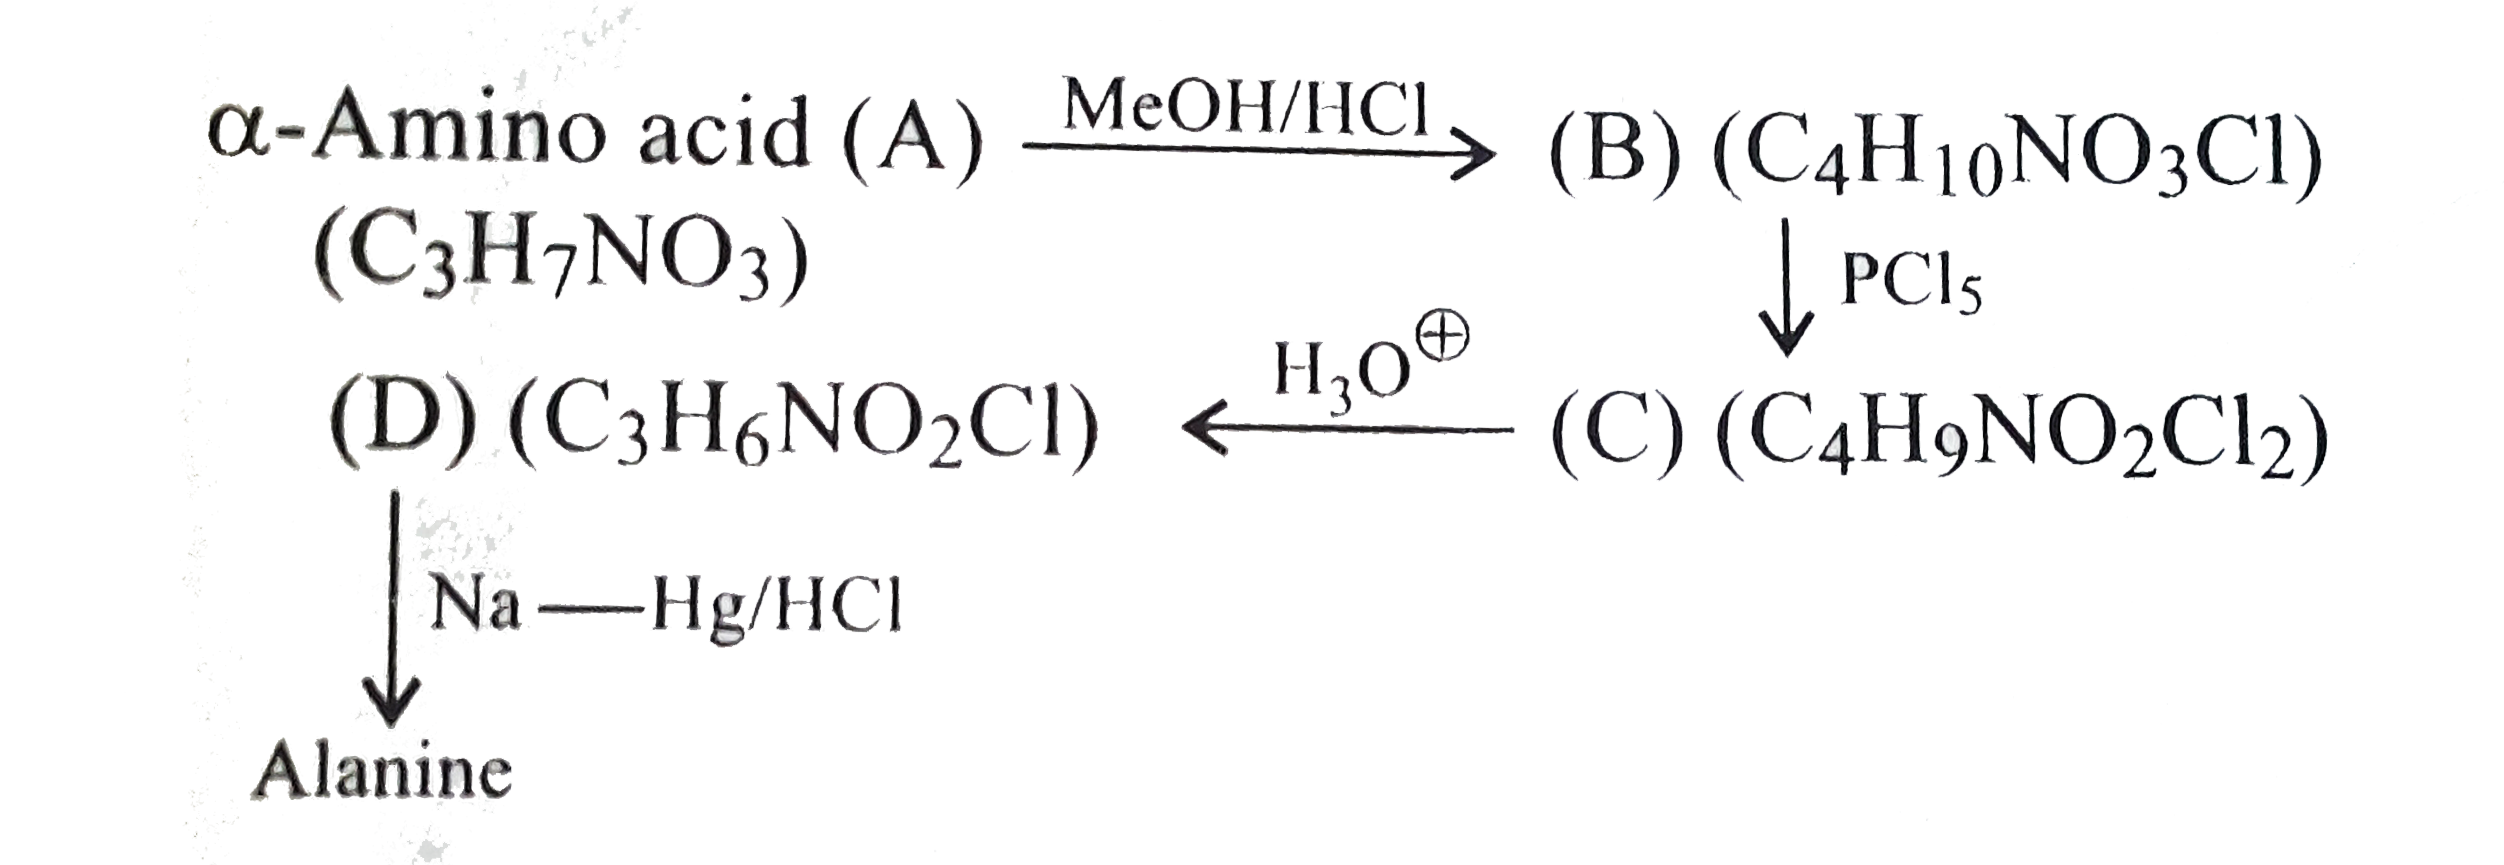 Compound 'A' has many functional groups.